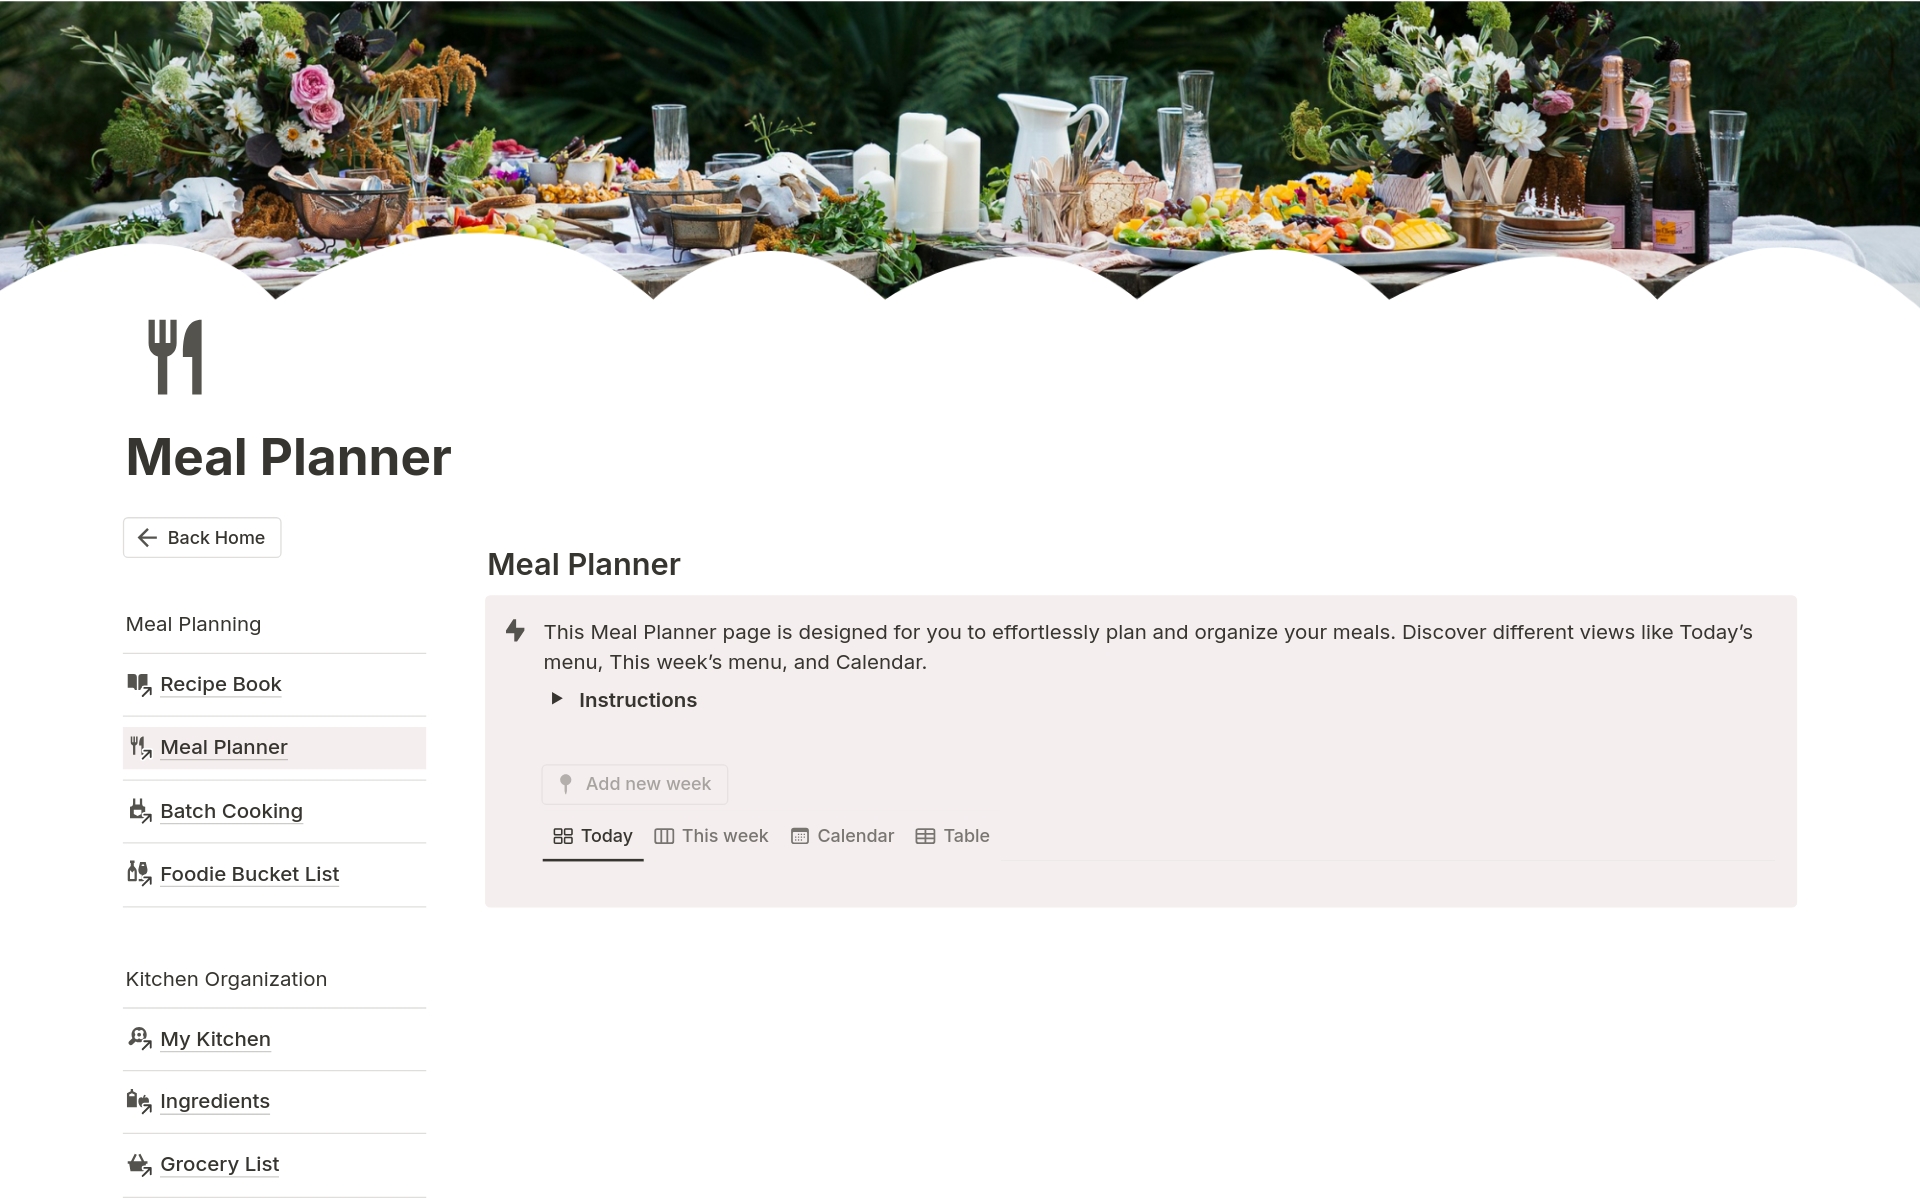 Plan, organize, and prepare your meals like a pro with our meal planner & recipe book.